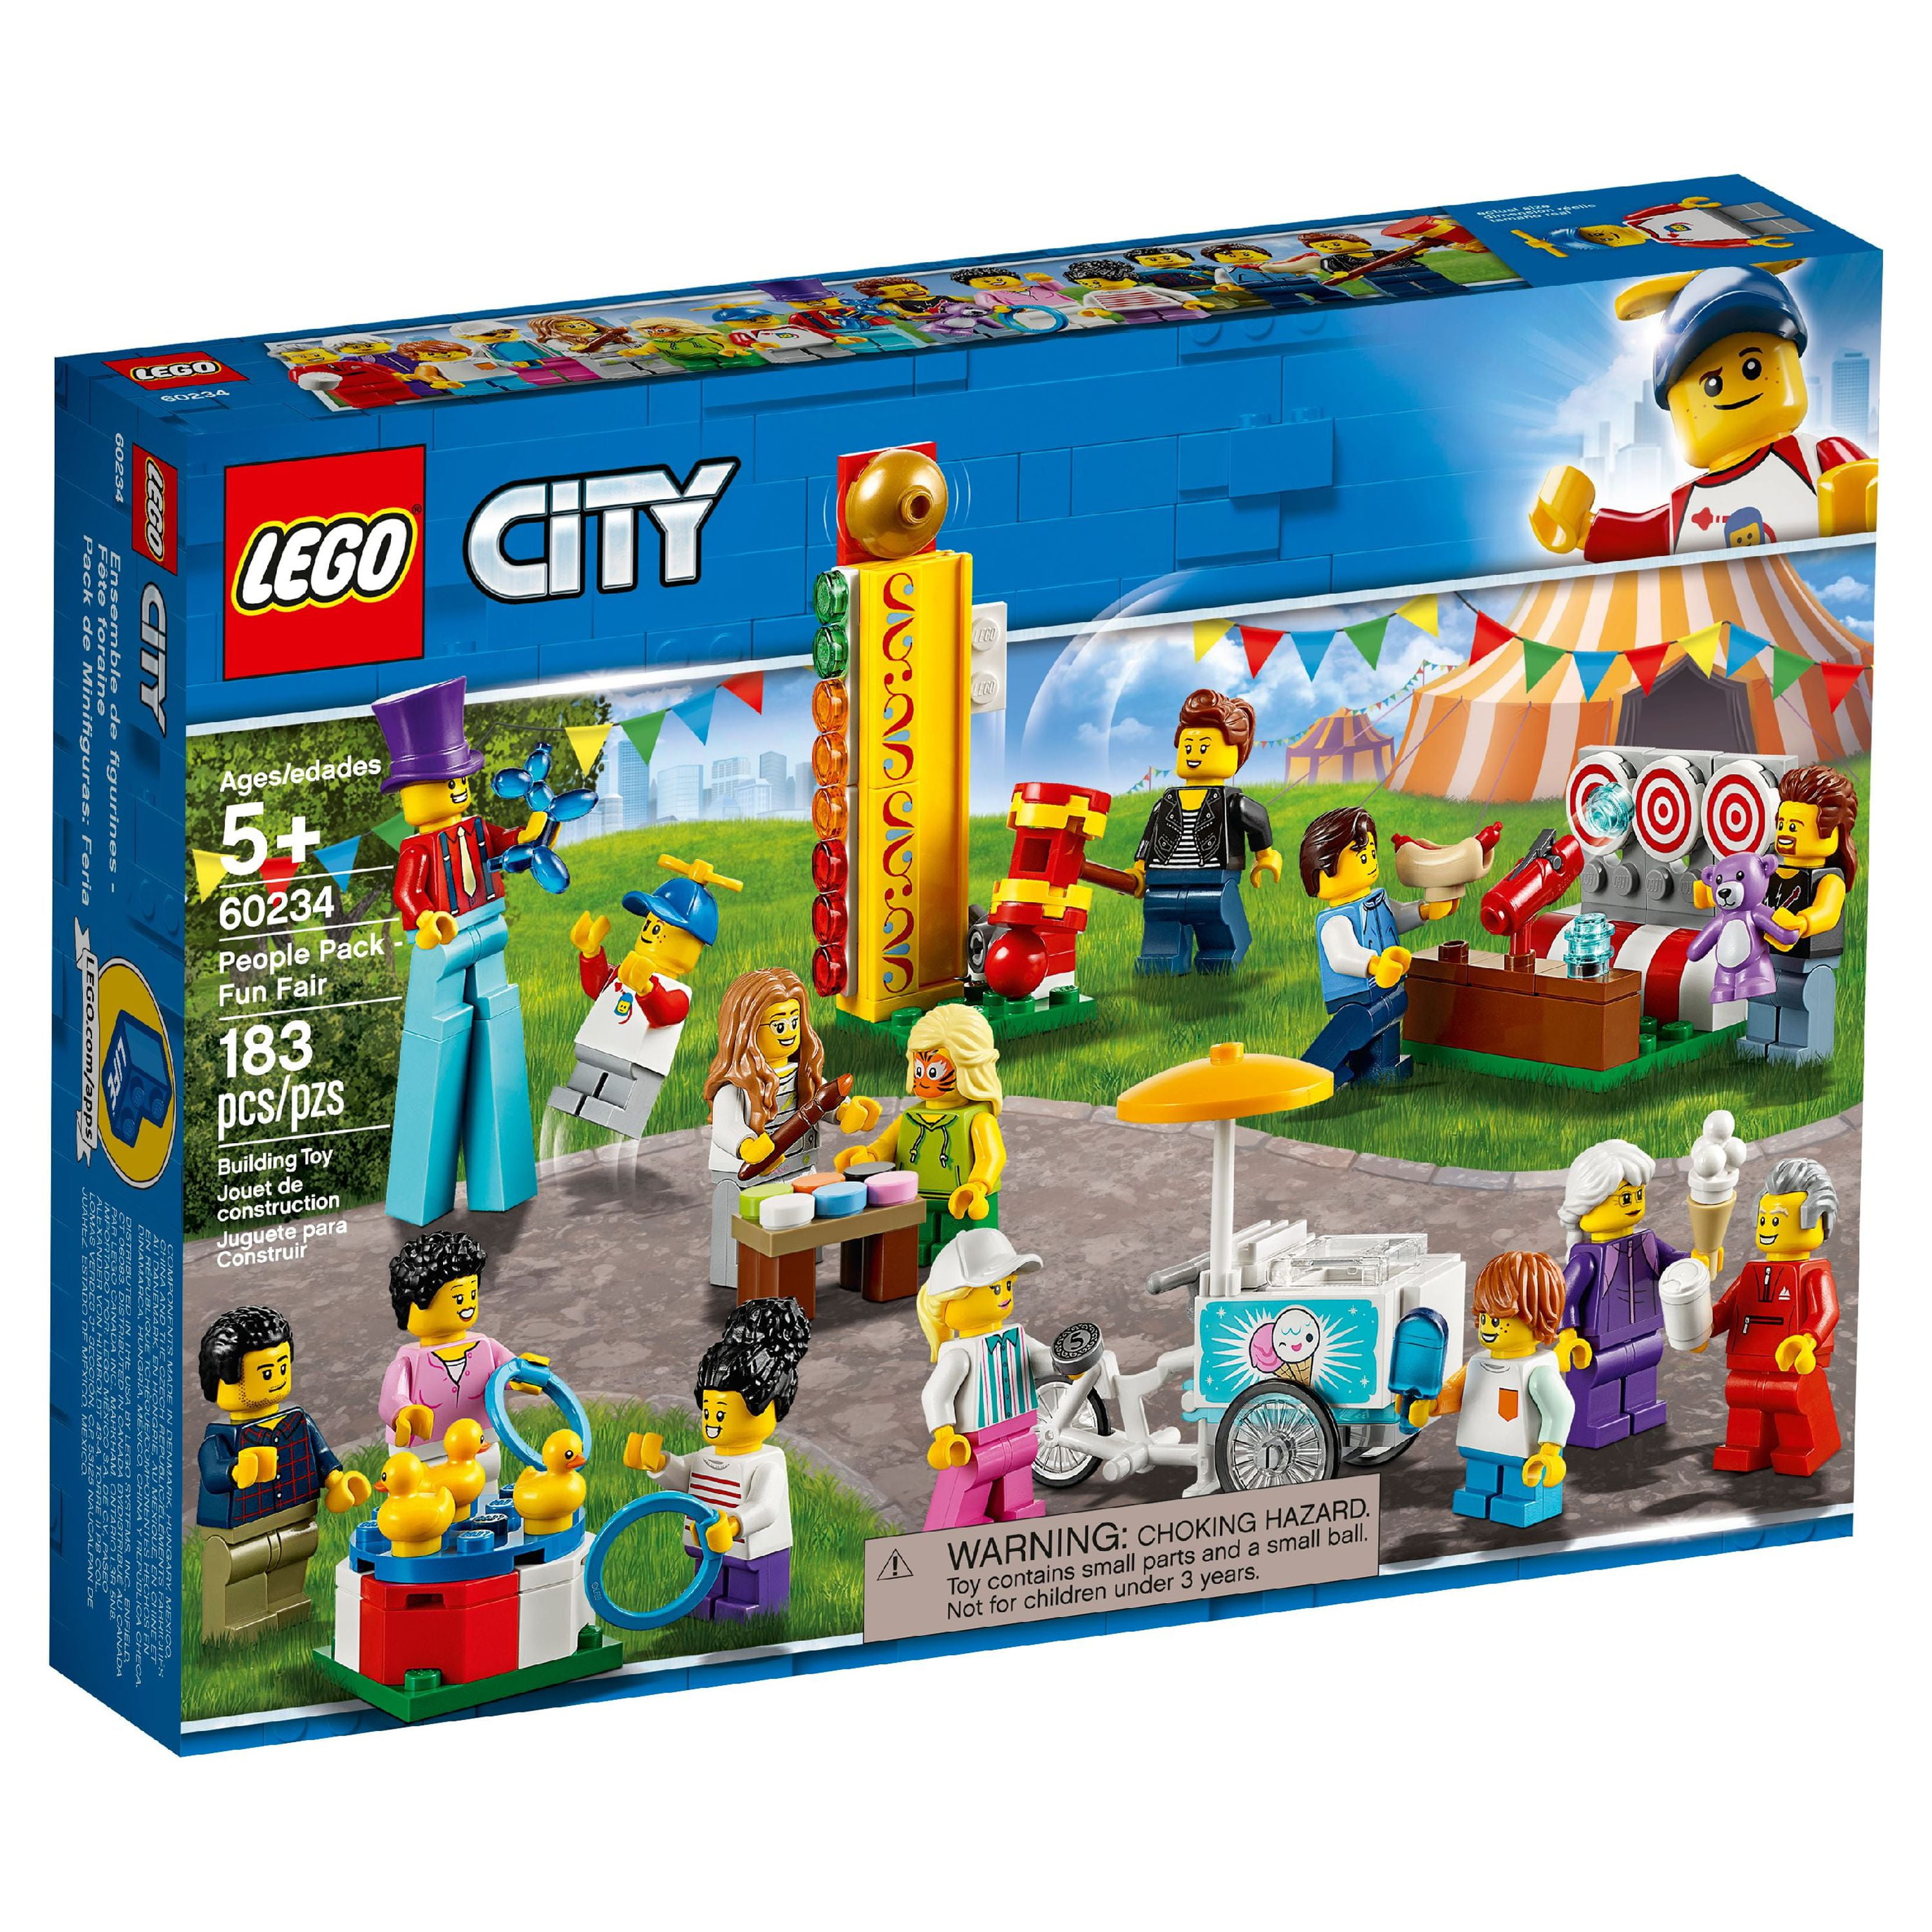 LEGO City Building Ideas - Frugal Fun For Boys and Girls